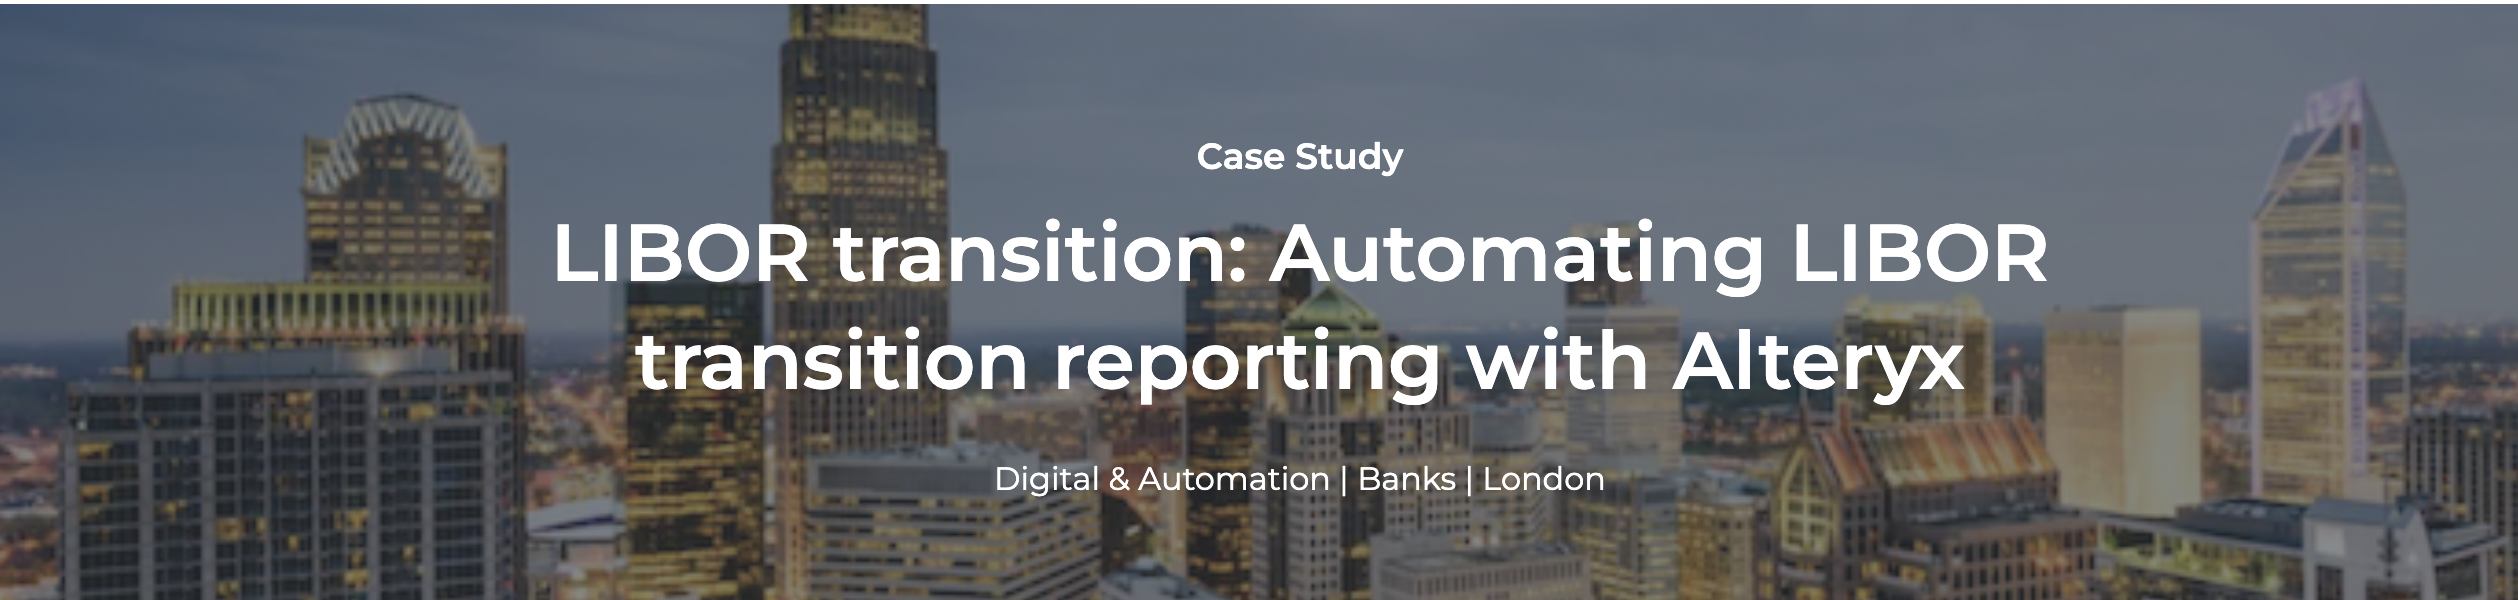 Digital Case study: Automating LIBOR transition reporting with Alteryx